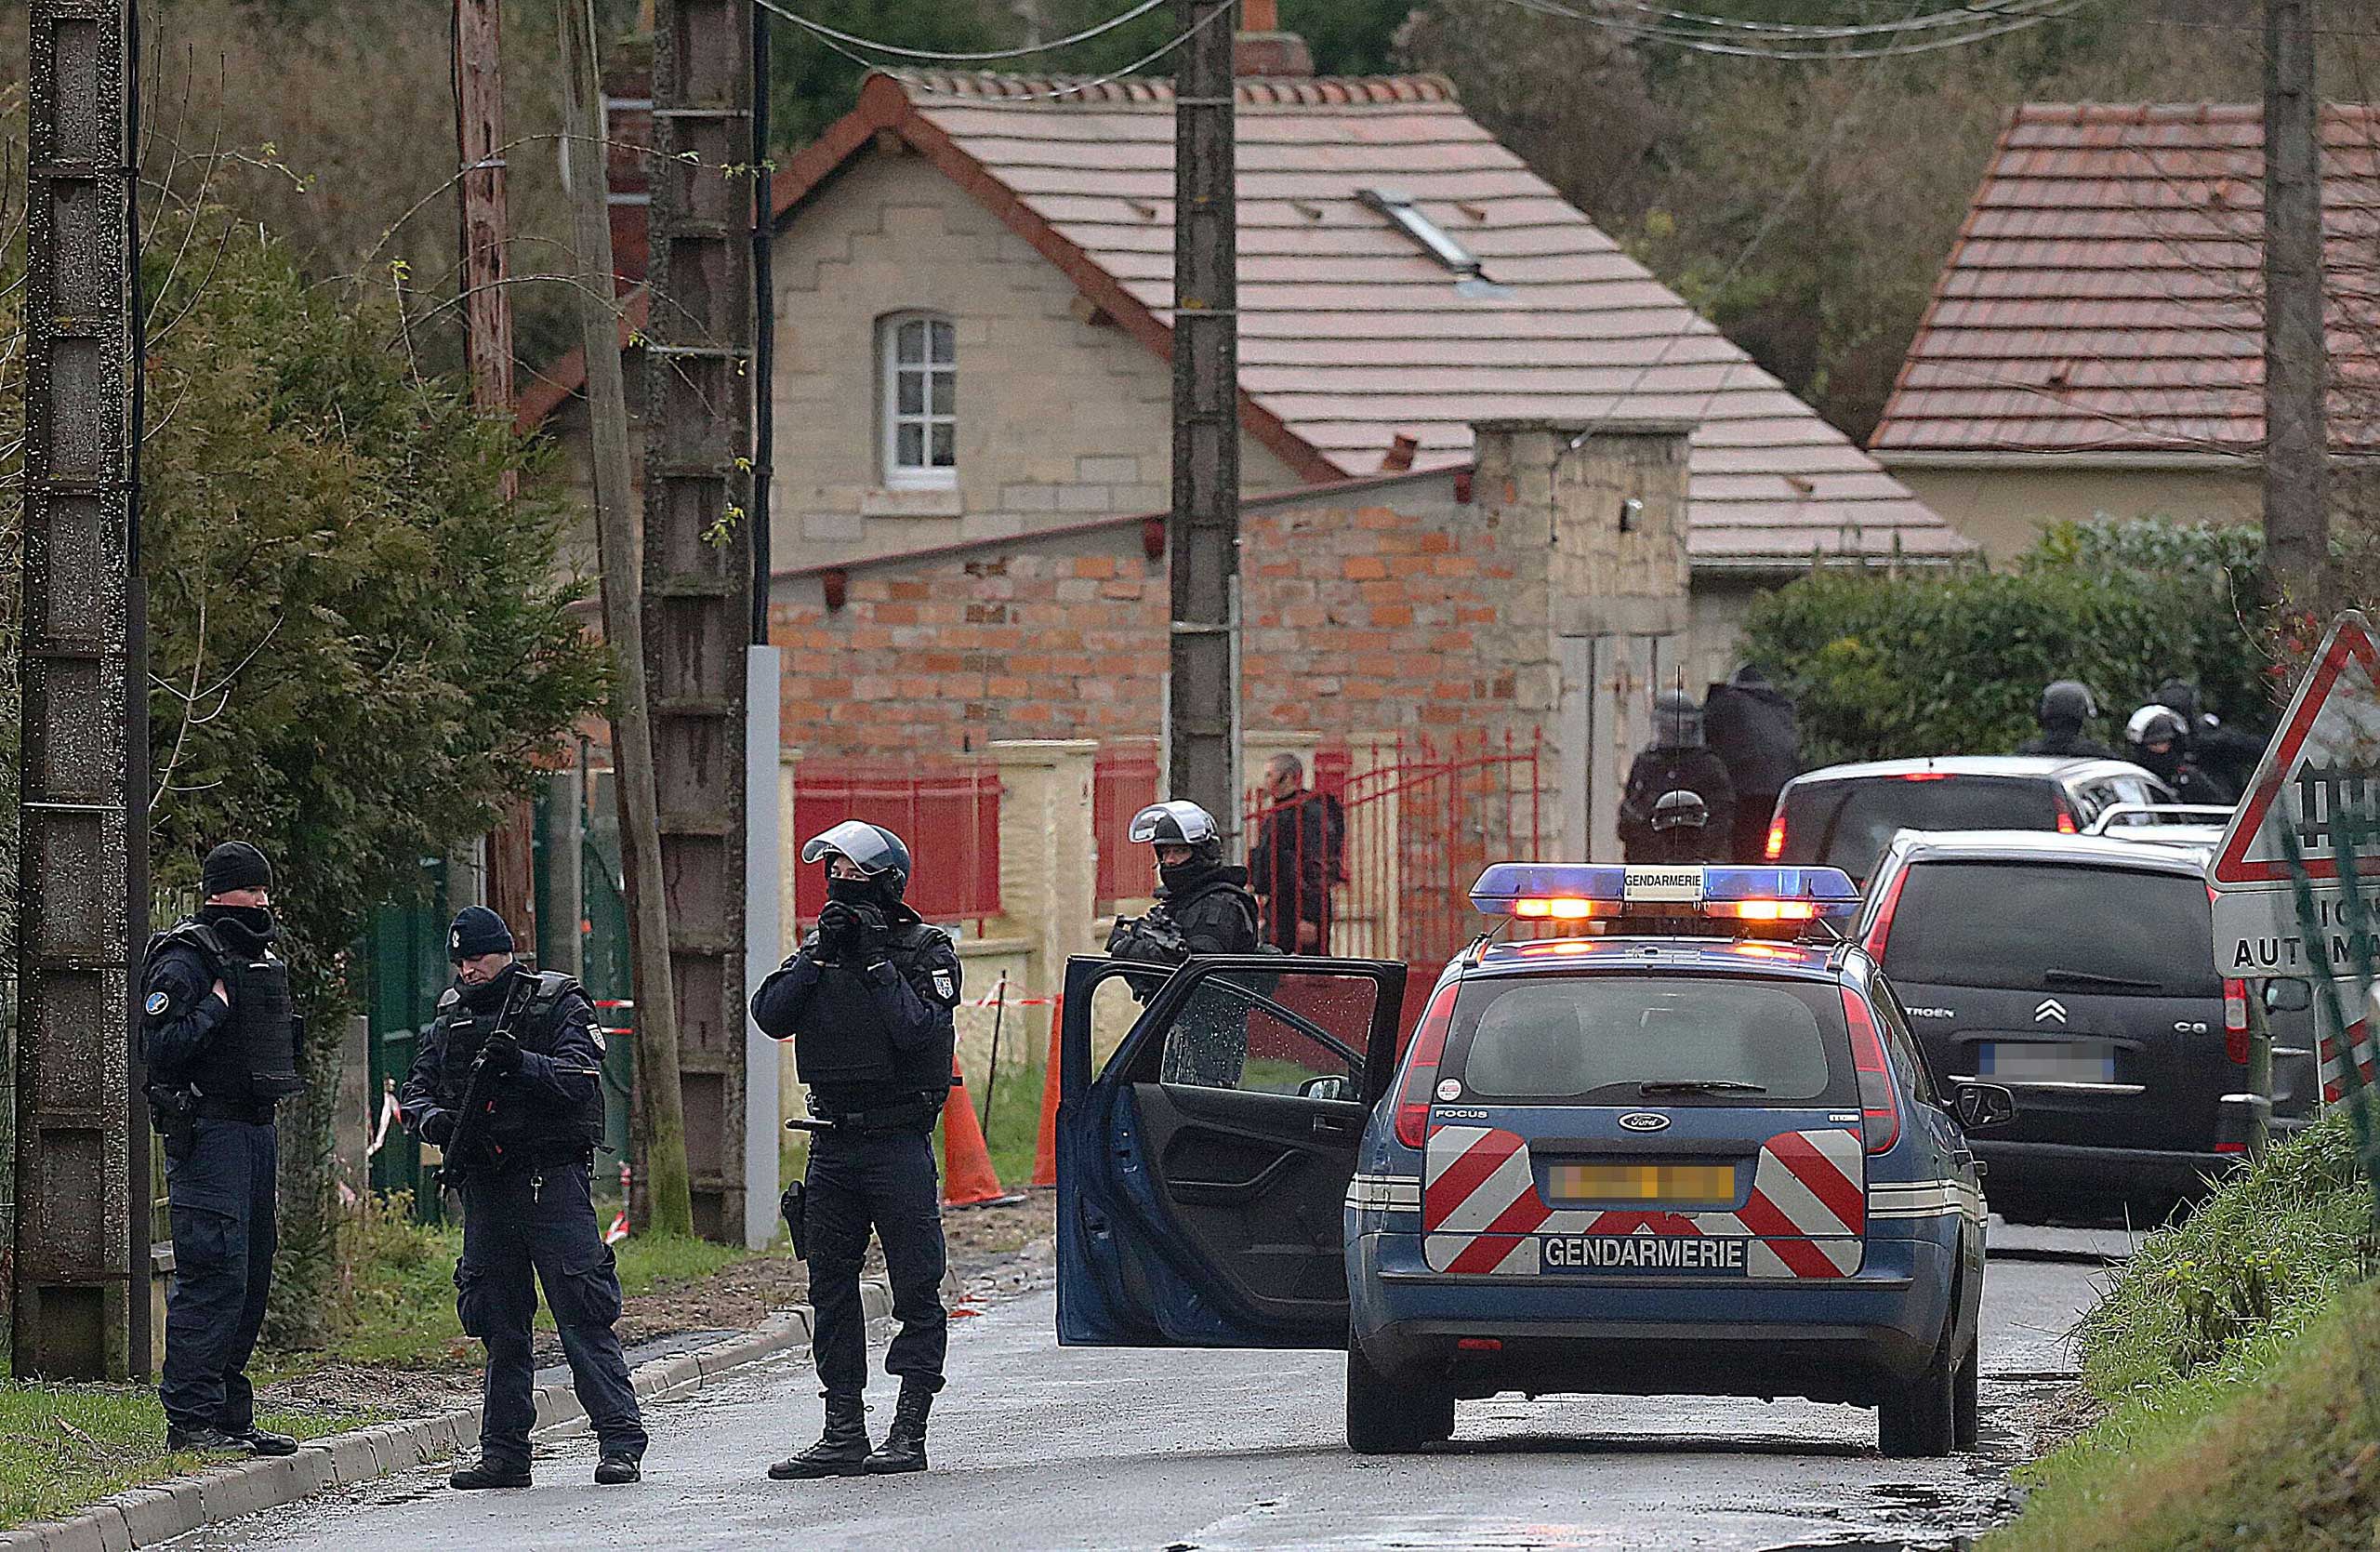 Members of GIPN and of RAID, French police special forces, are pictured in Corcy, near Villers-Cotterets, north-east of Paris, on Jan. 8, 2015, where the two armed suspects from the attack on French satirical weekly newspaper Charlie Hebdo were spotted in a gray Clio. (Francois Nascimbeni—AFP/Getty Images)